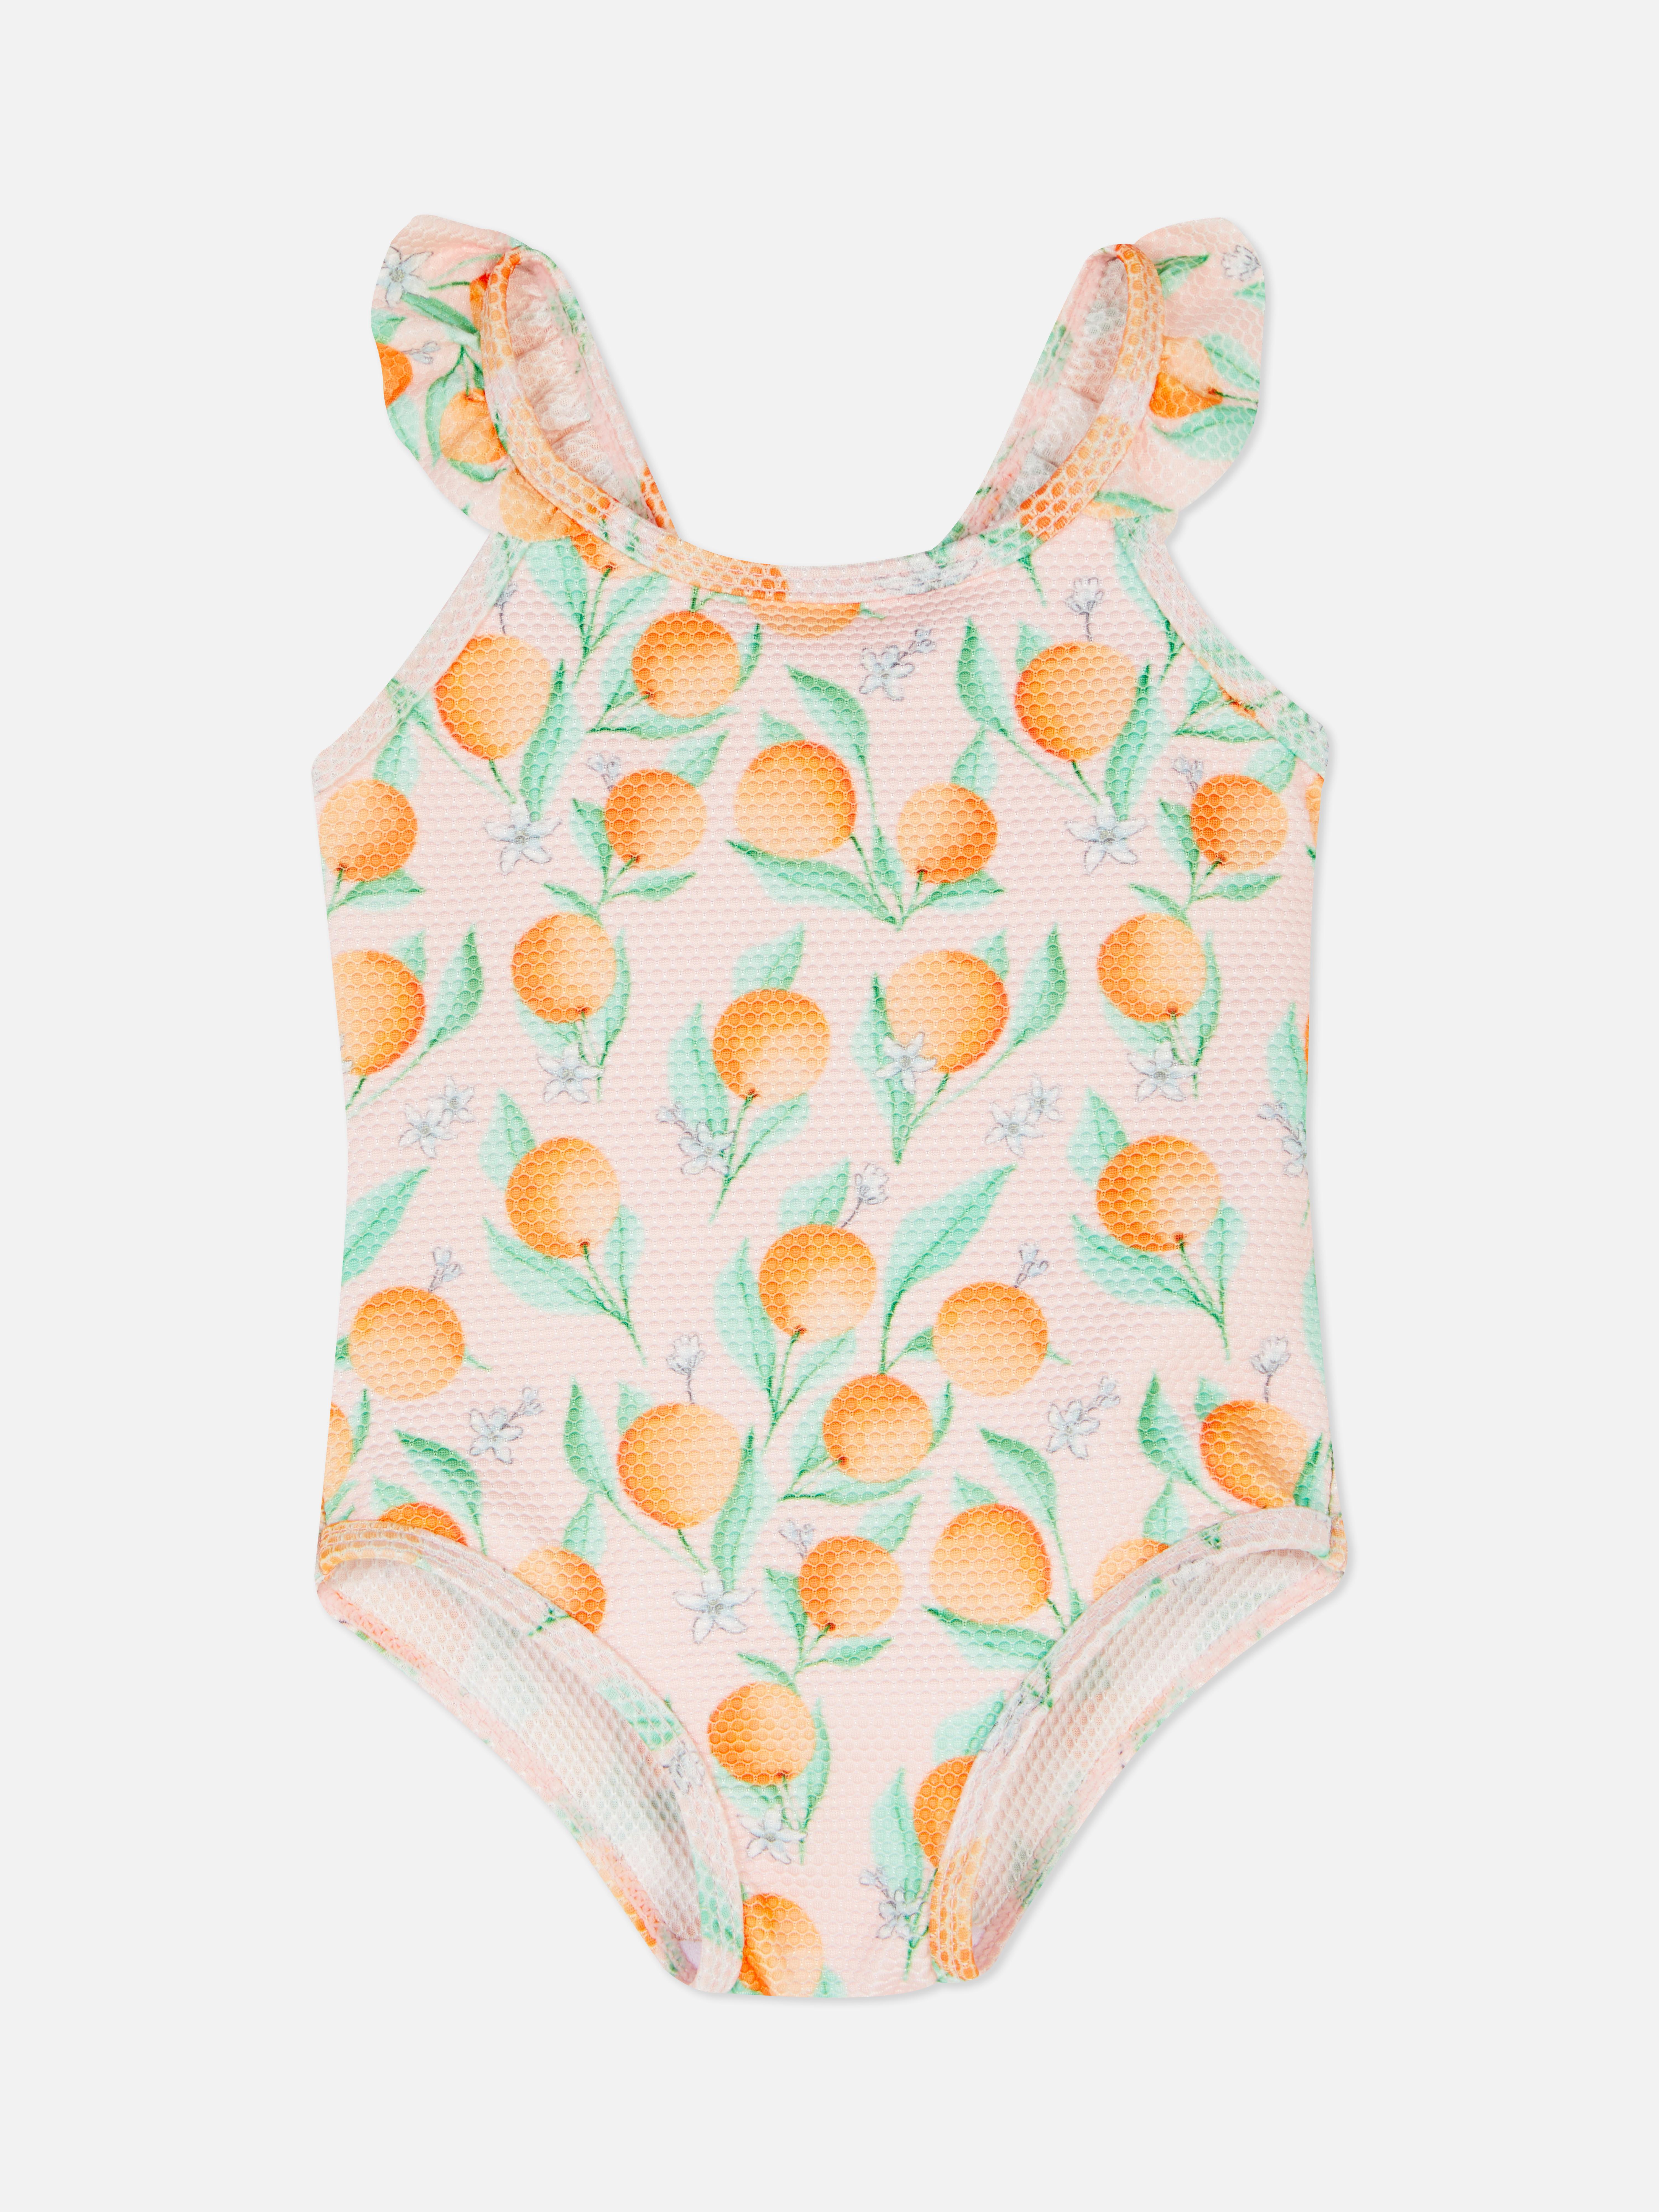 Stacey Solomon Printed Swimsuit